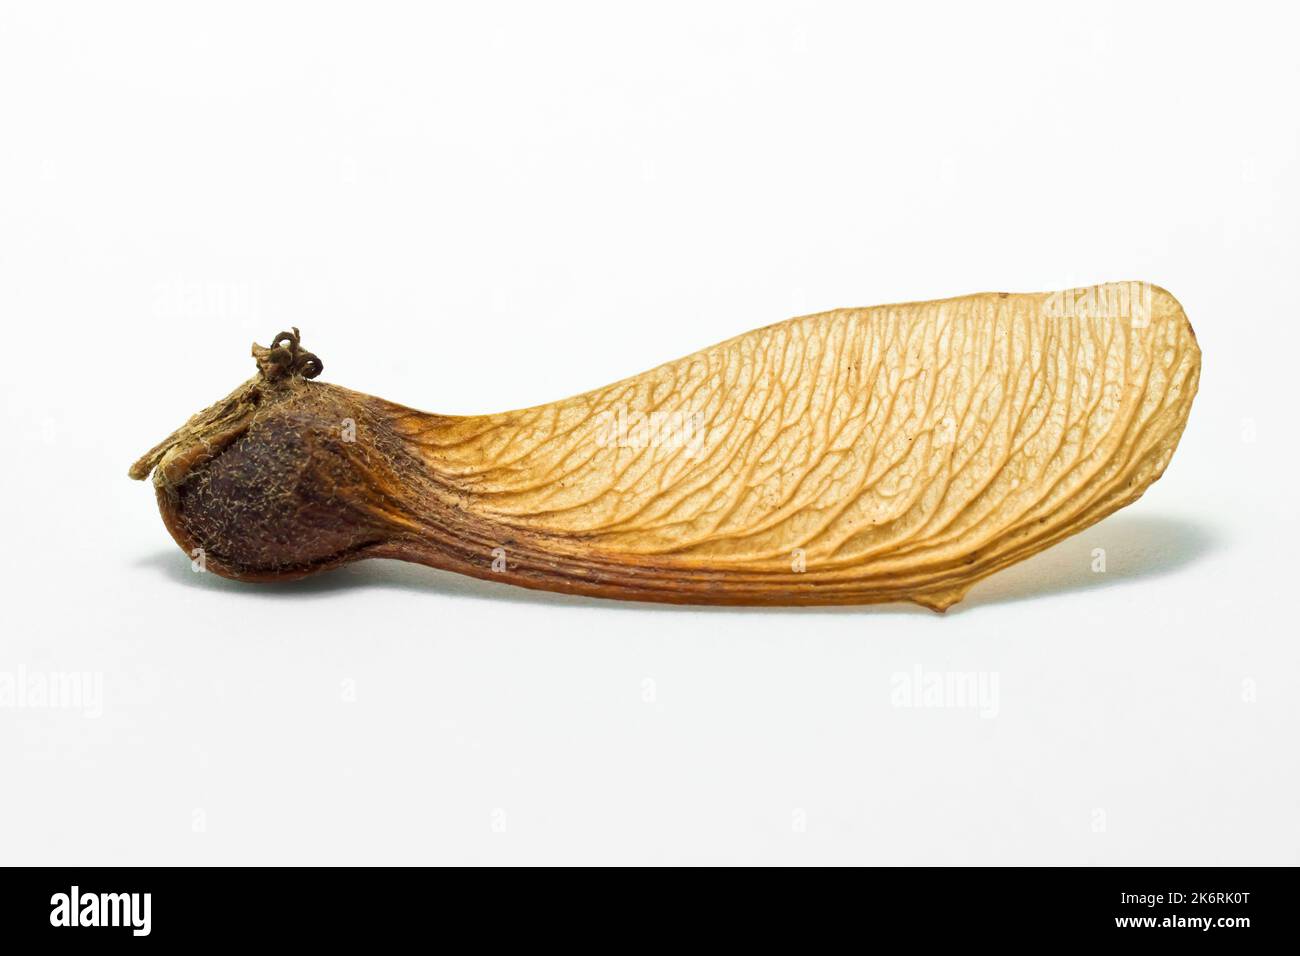 Sycamore (acer pseudoplatanus), close up showing the familiar winged fruit or seed of the tree isolated against a white background. Stock Photo